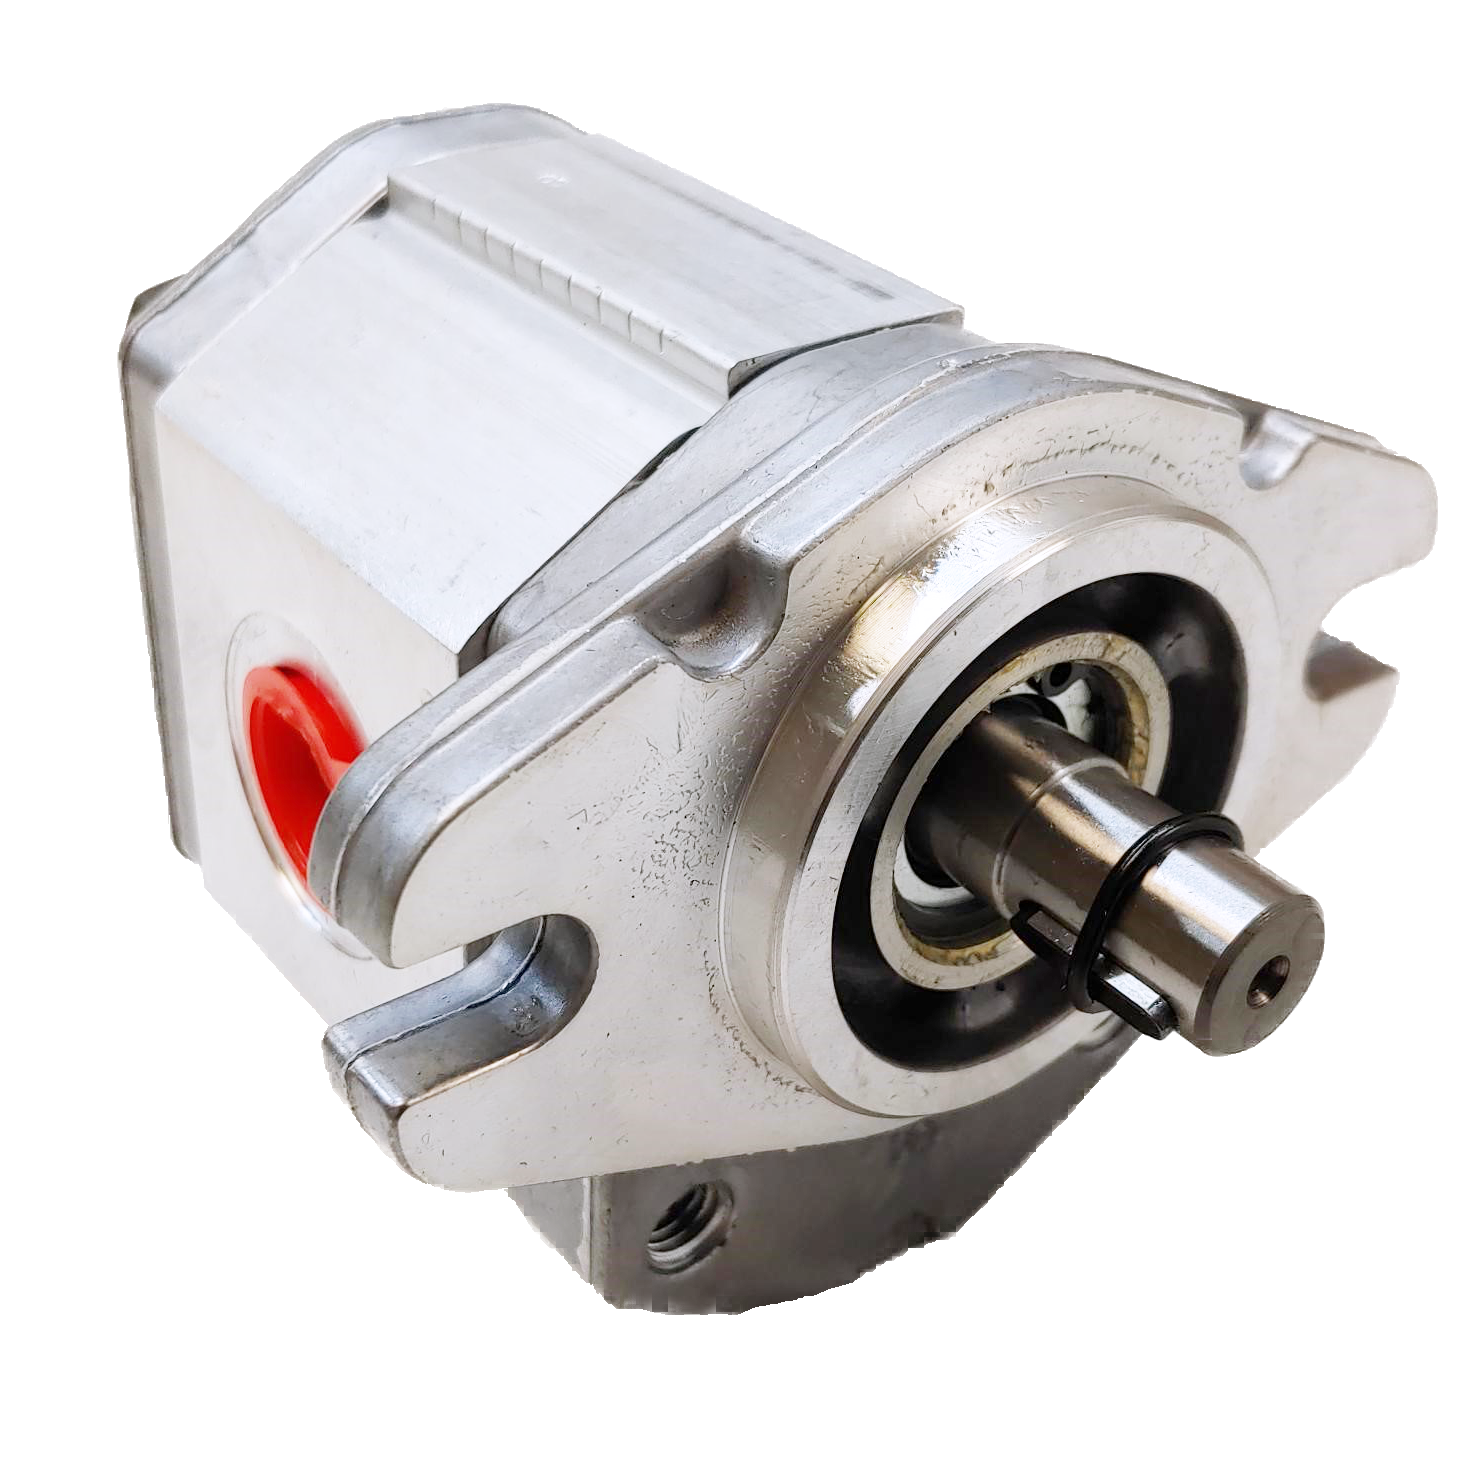 ALM1A-R-11-E2 : Marzocchi Gear Motor, Bidirectional, 7.6cc, 2900psi rated, 3500RPM, 0.625 (5/8") #10 SAE ports, 1/2" Bore x 1/8" Keyed Shaft